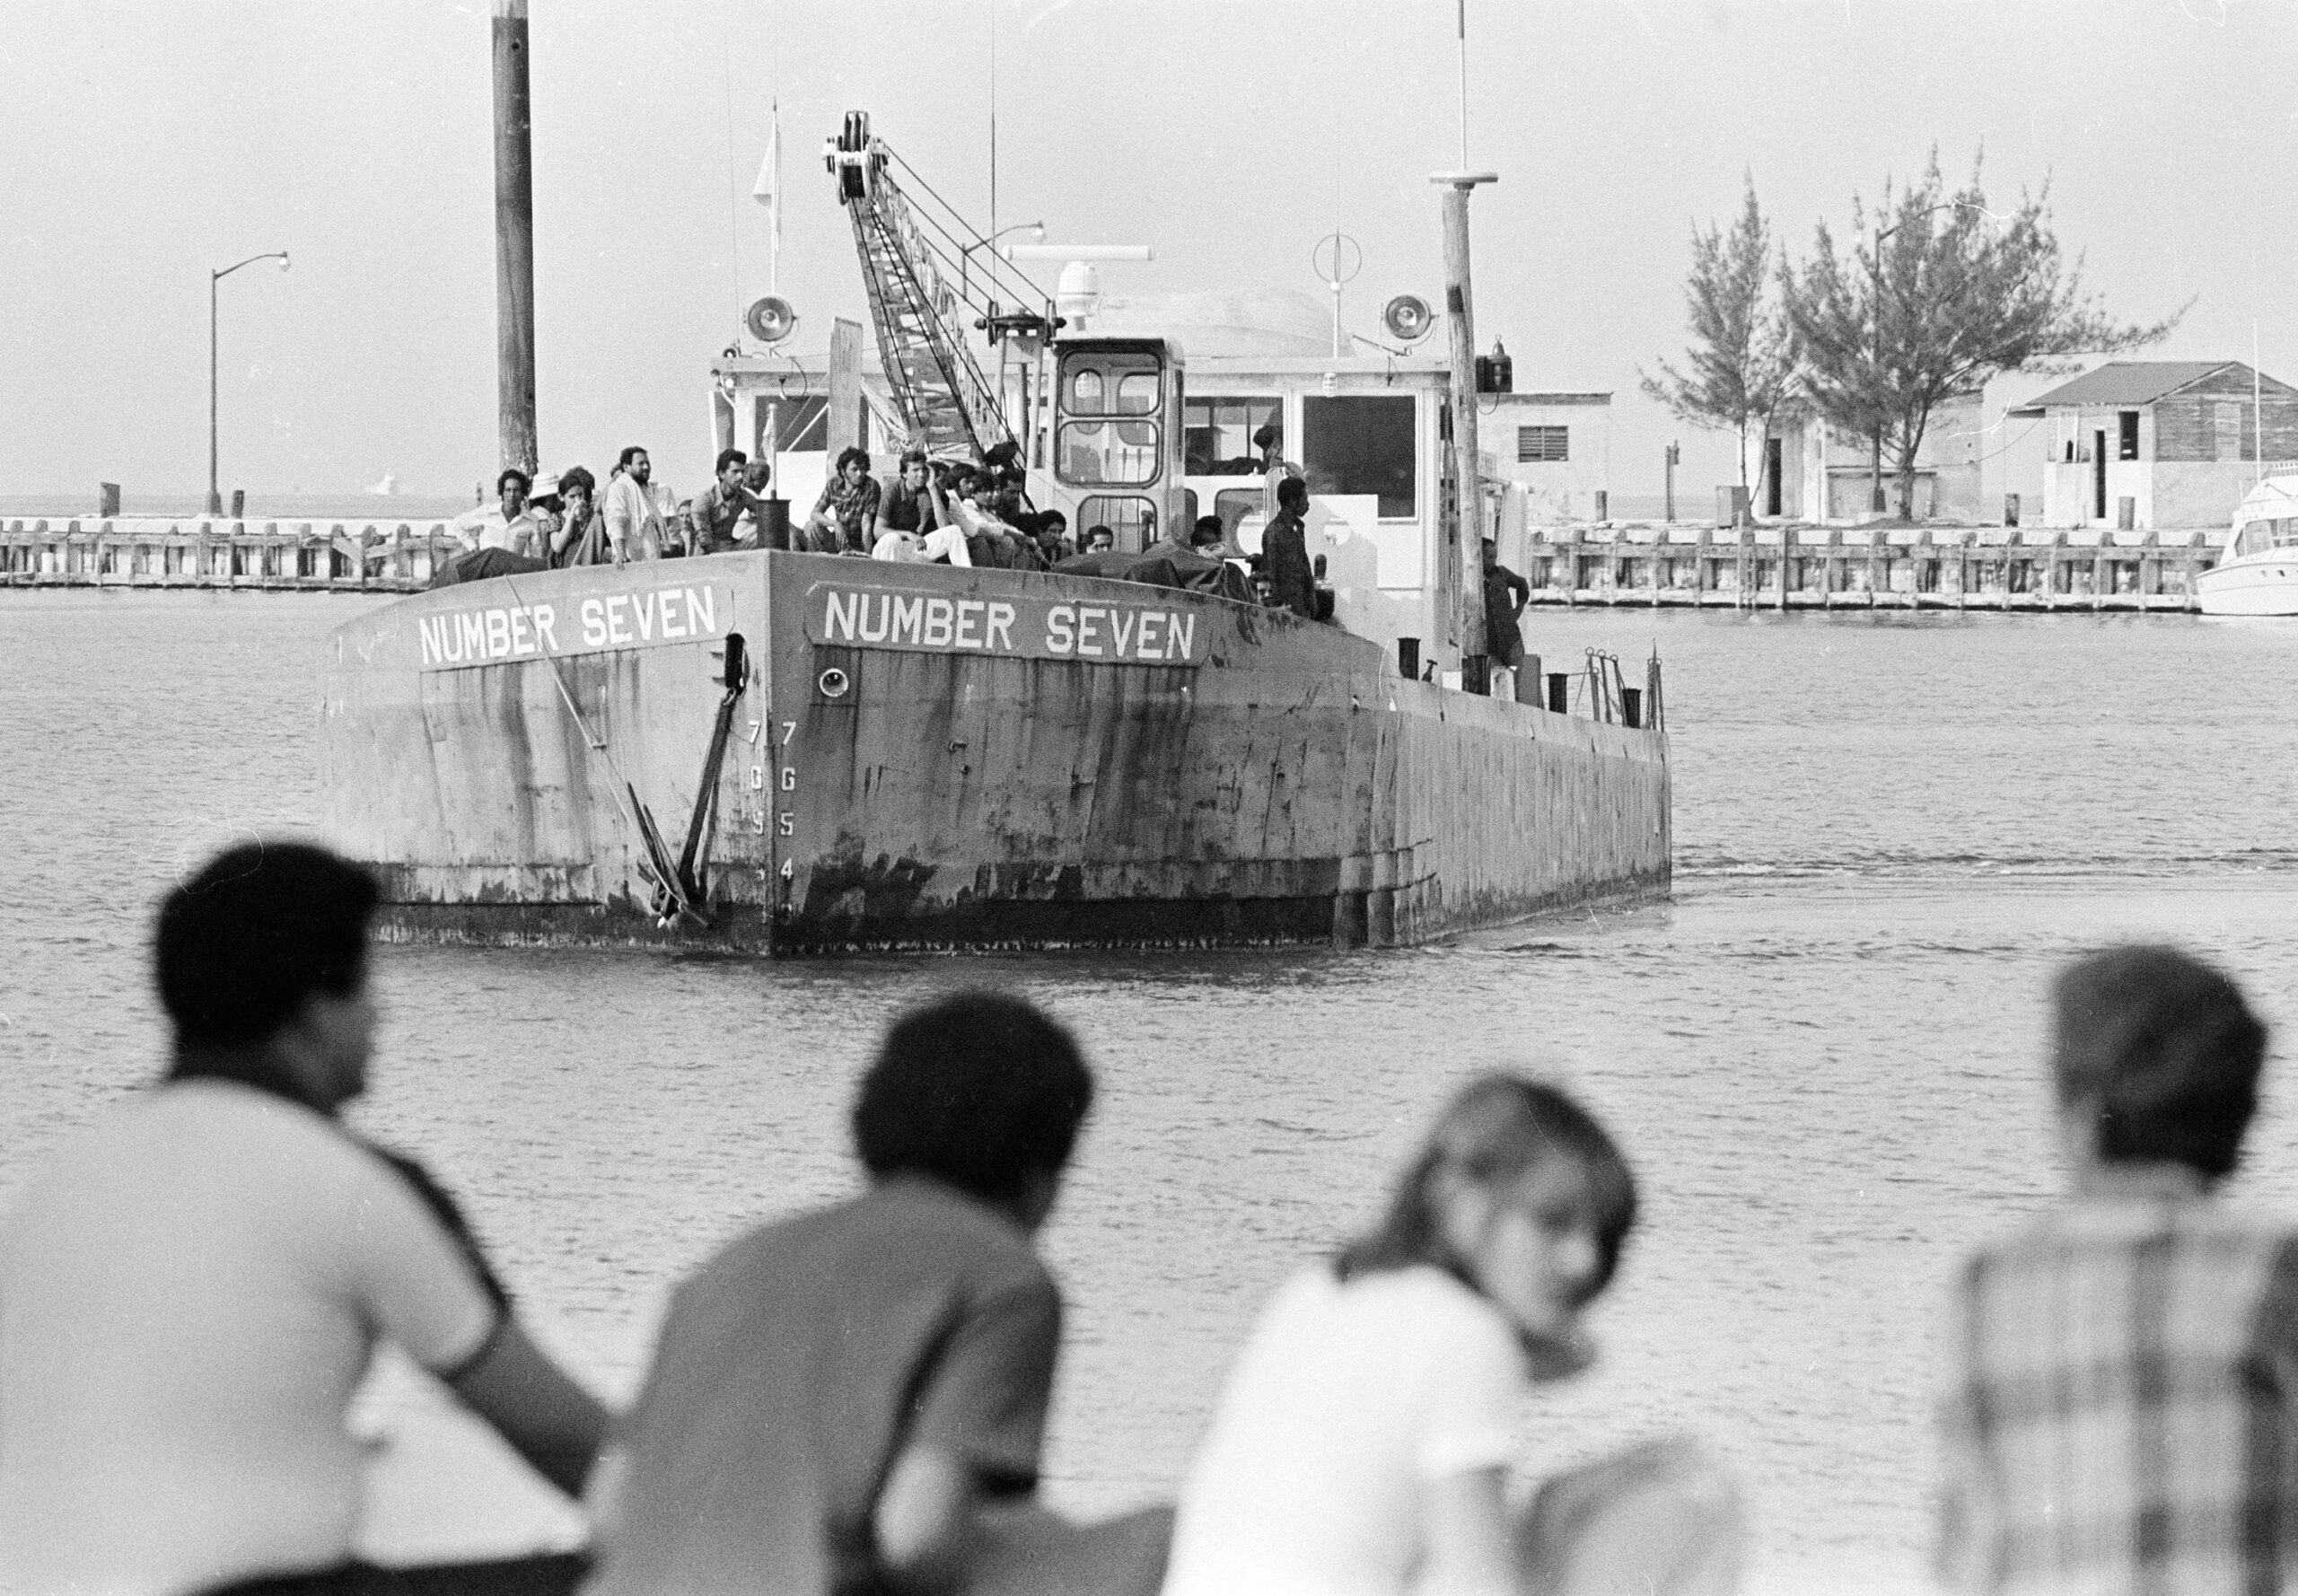 ends and relatives of Cuban refugees line a dock in Key West in April 1980, awaiting a ship